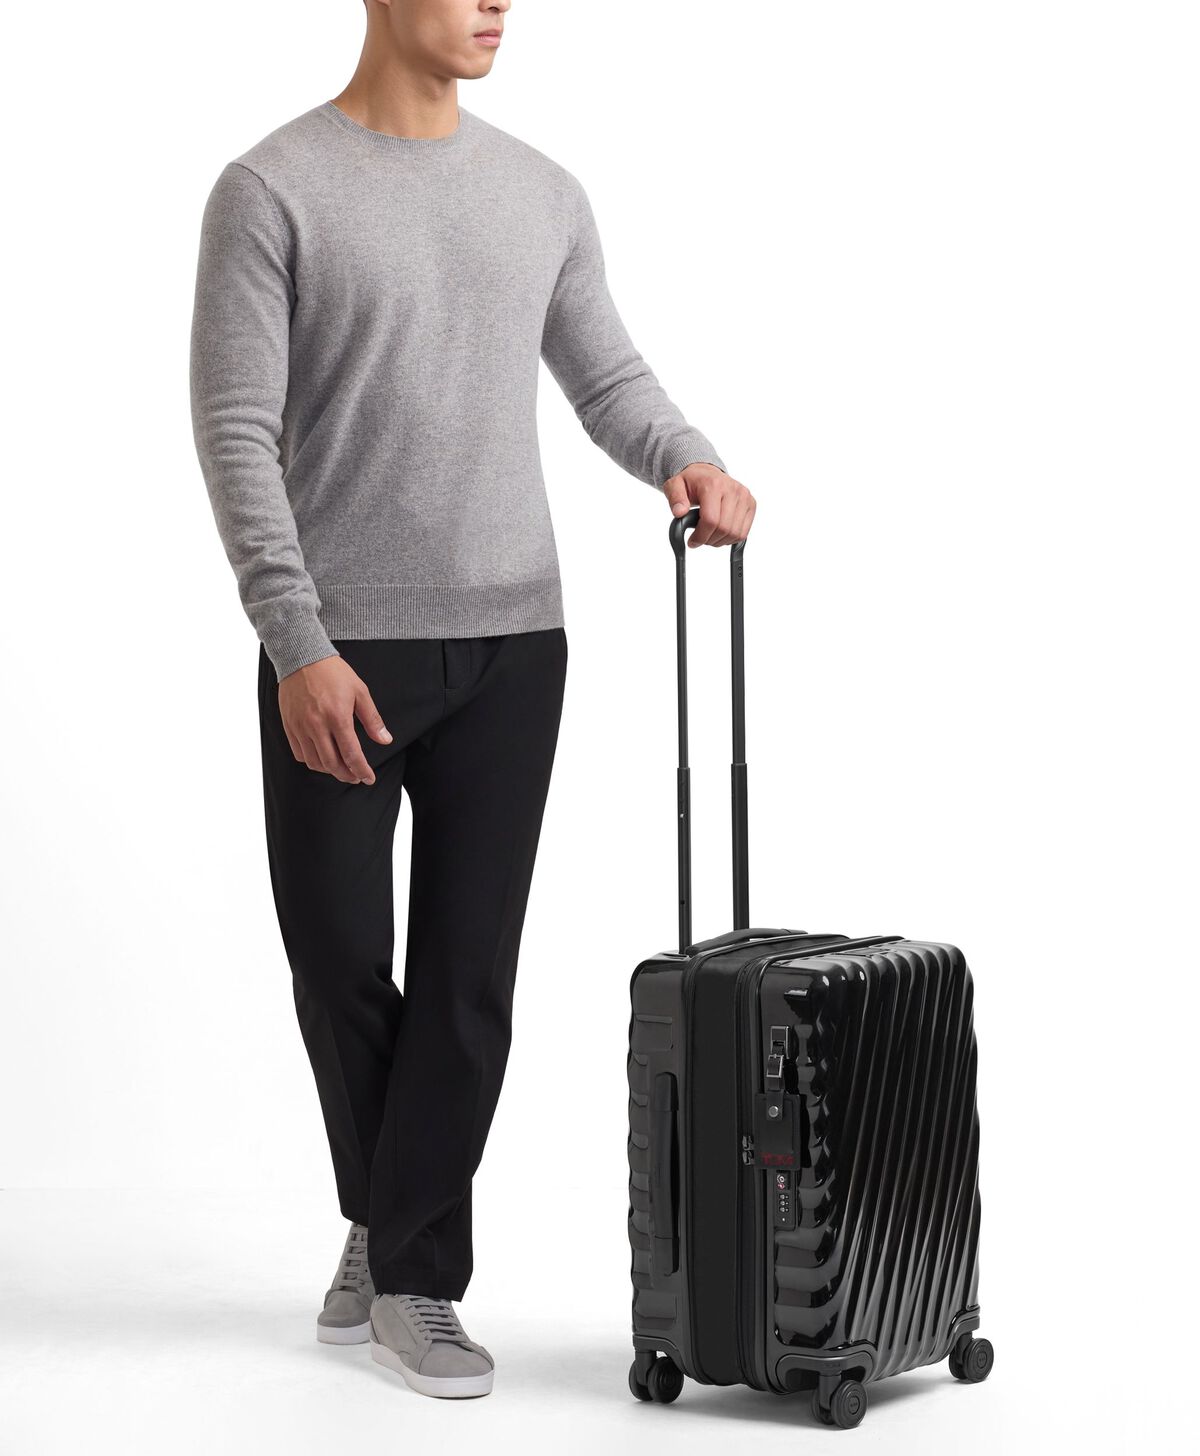 19 Degree International Expandable Carry-On 55 cm